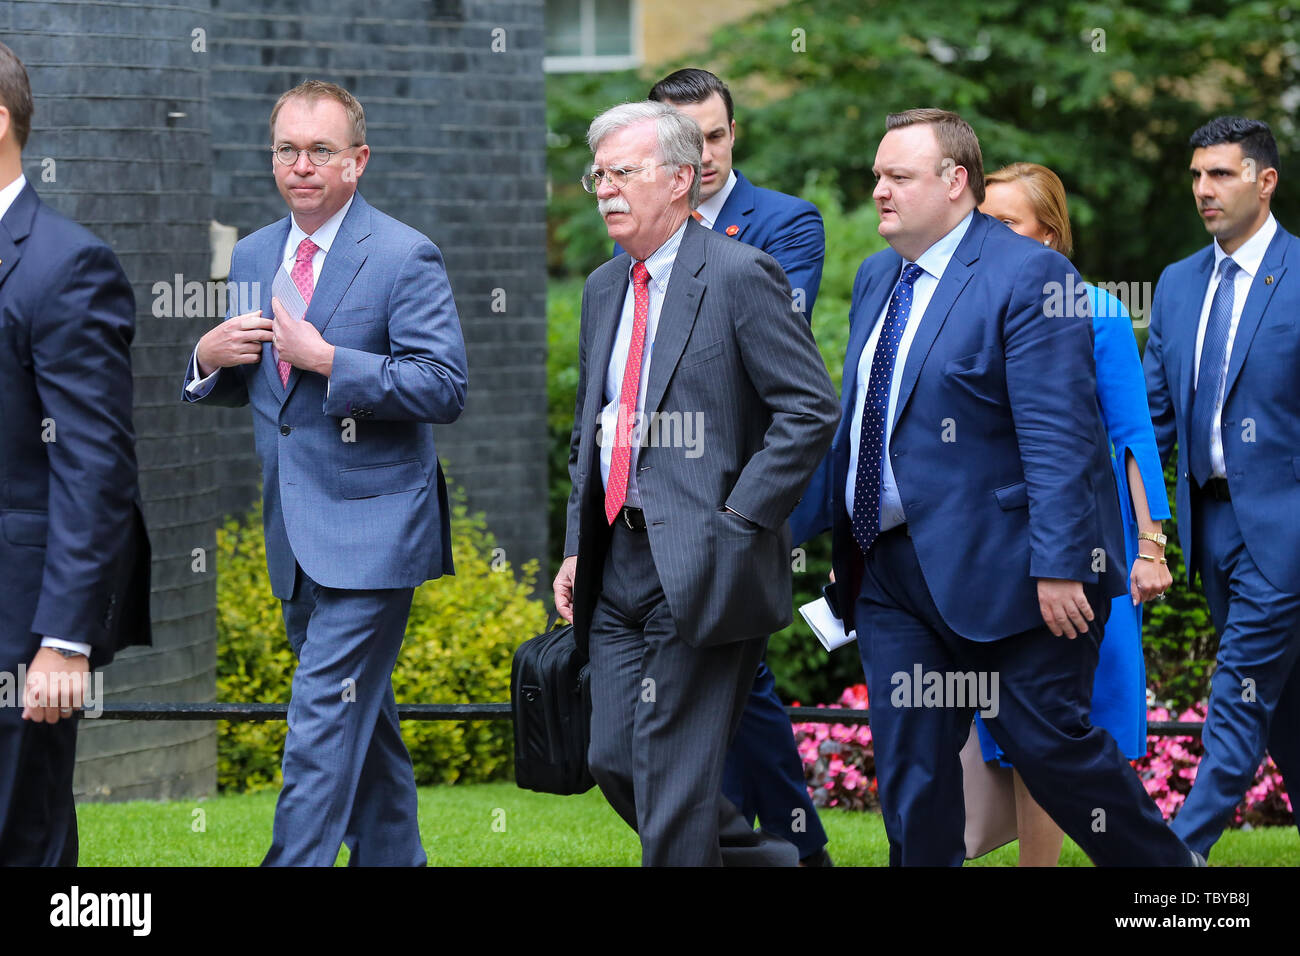 Downing Street, London, UK. 4th June, 2019. John Bolton National Security Advisor of the United States and the US President's entourage arrives in Downing Street as US President Donald Trump and First Lady Melania Trump continues their State Visit to the UK. Credit: Dinendra Haria/Alamy Live News Stock Photo